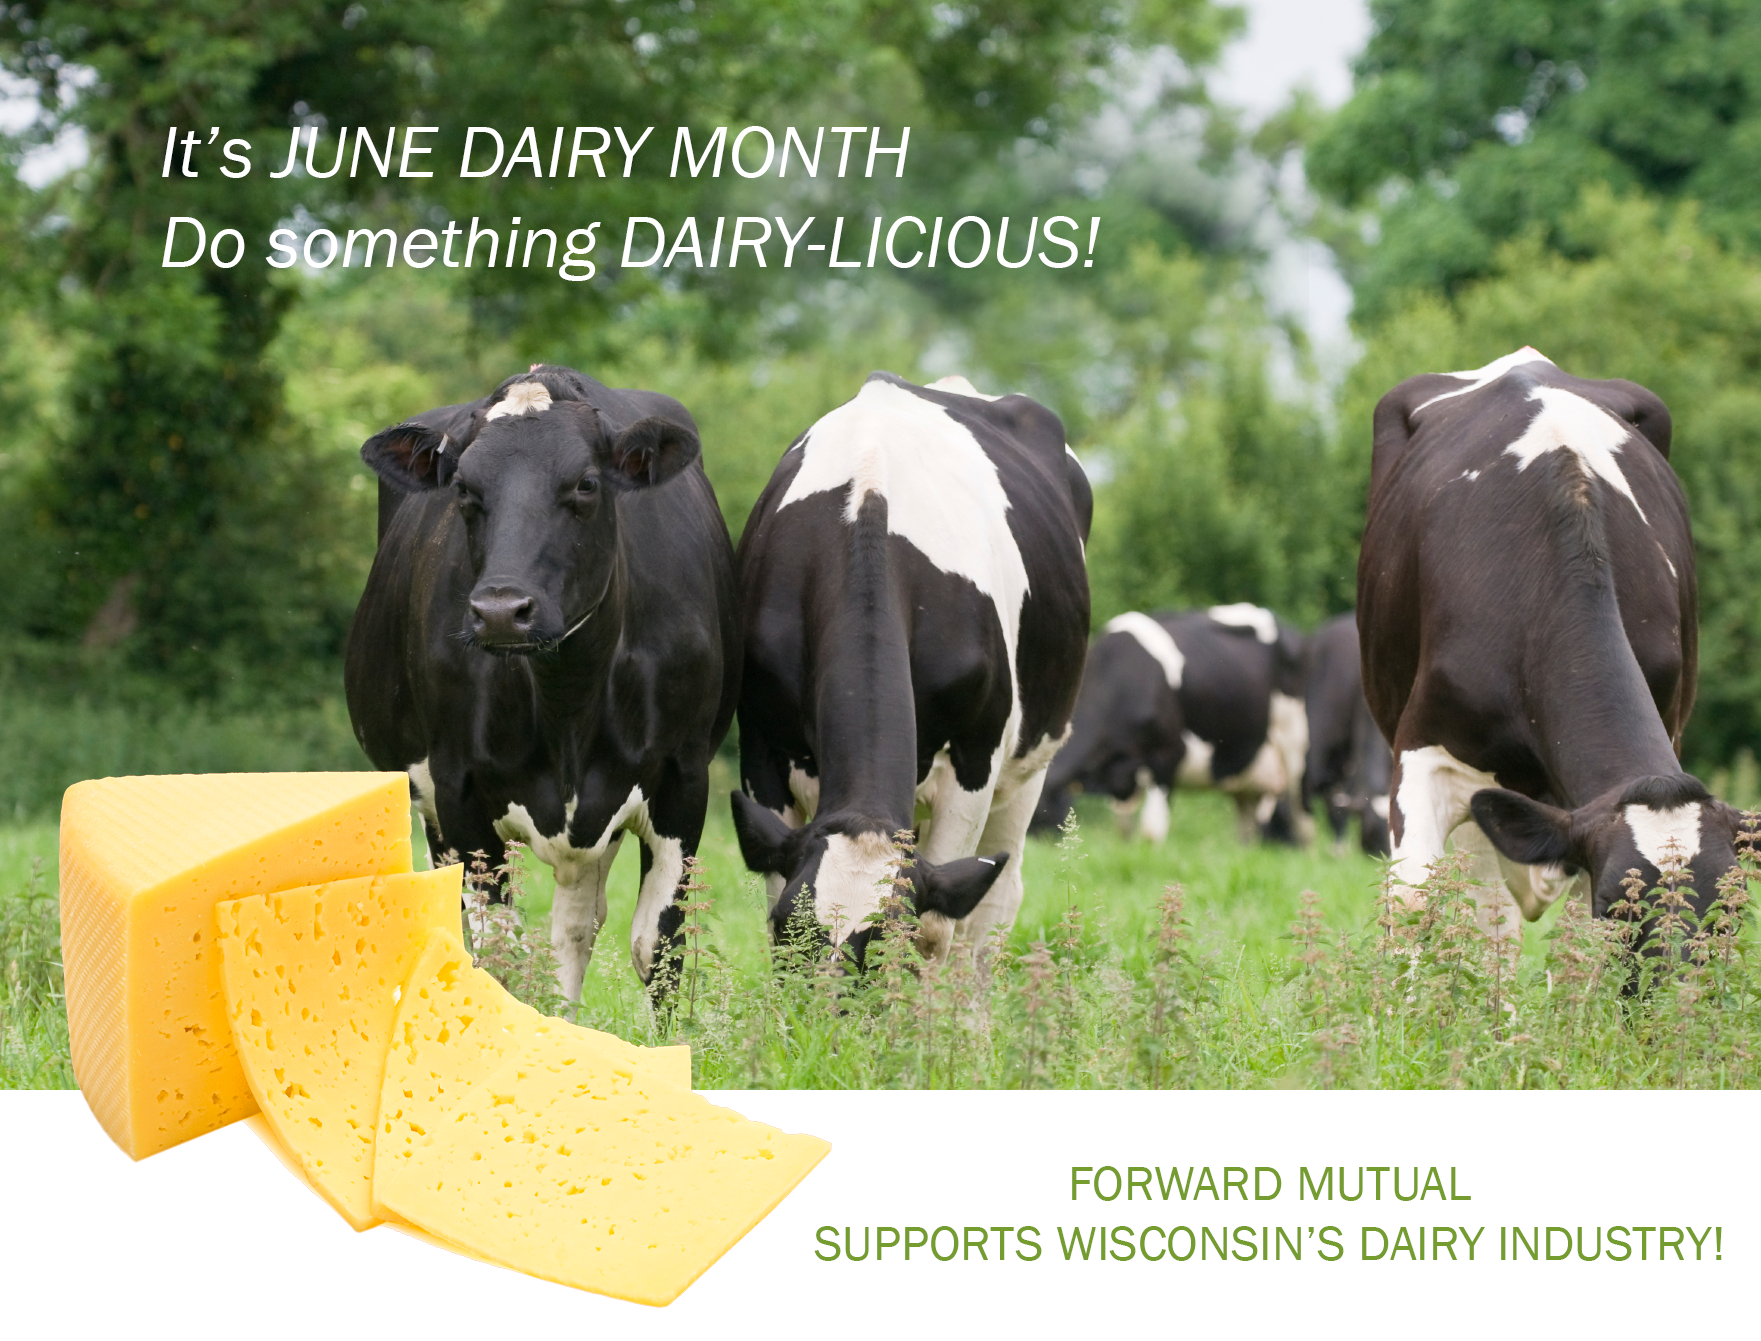 Forward Mutual supports June Dairy Month